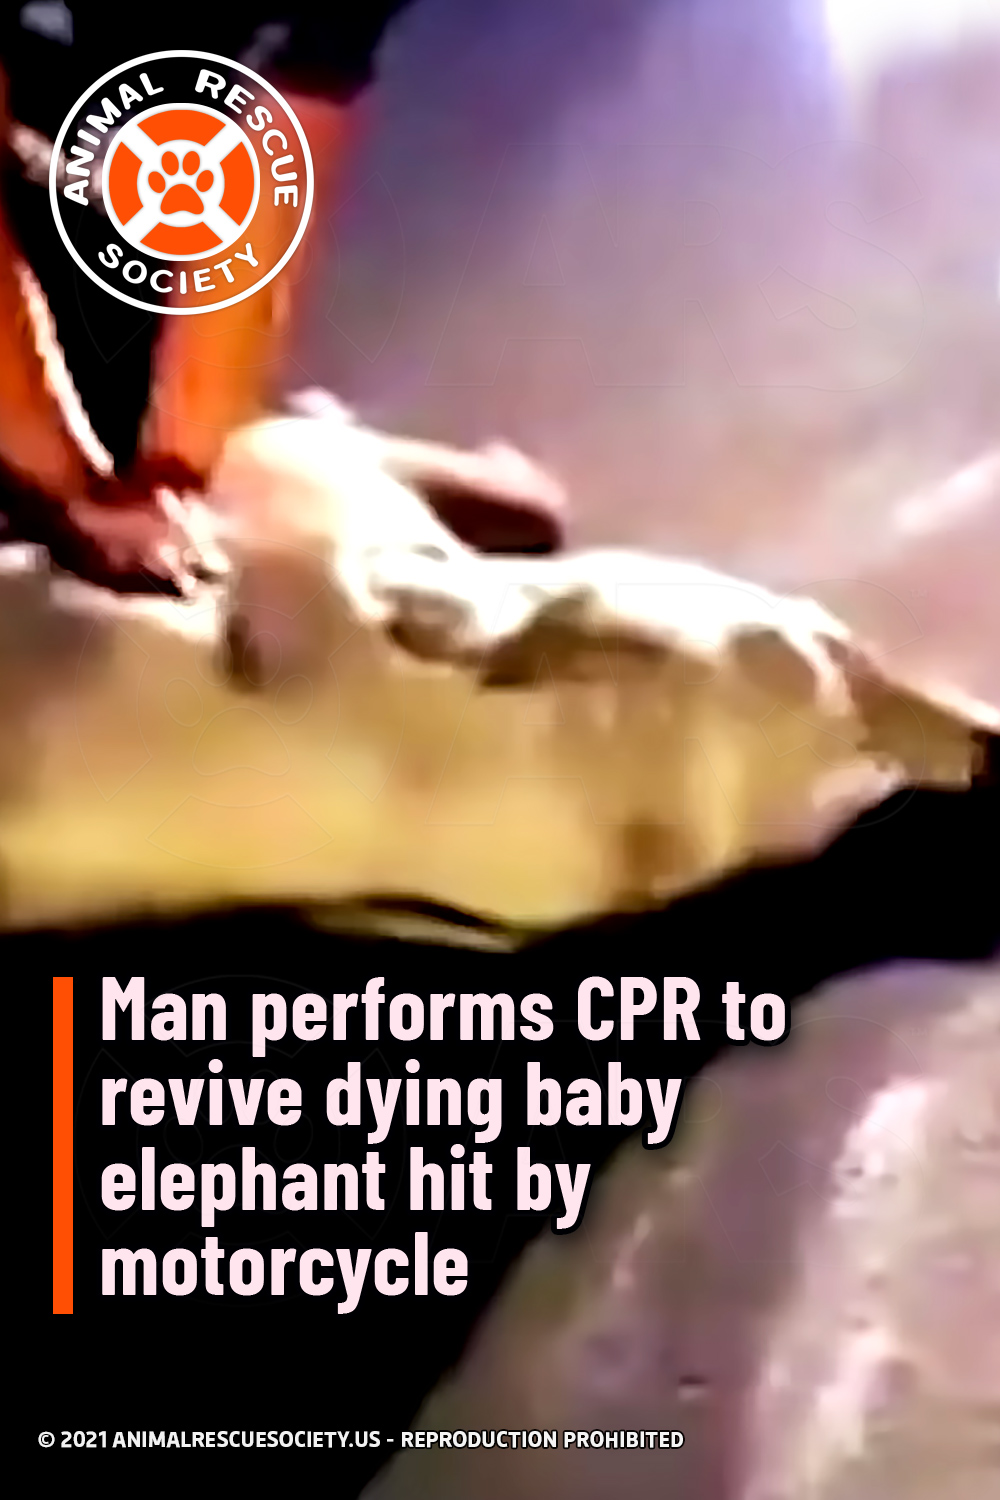 Man performs CPR to revive dying baby elephant hit by motorcycle